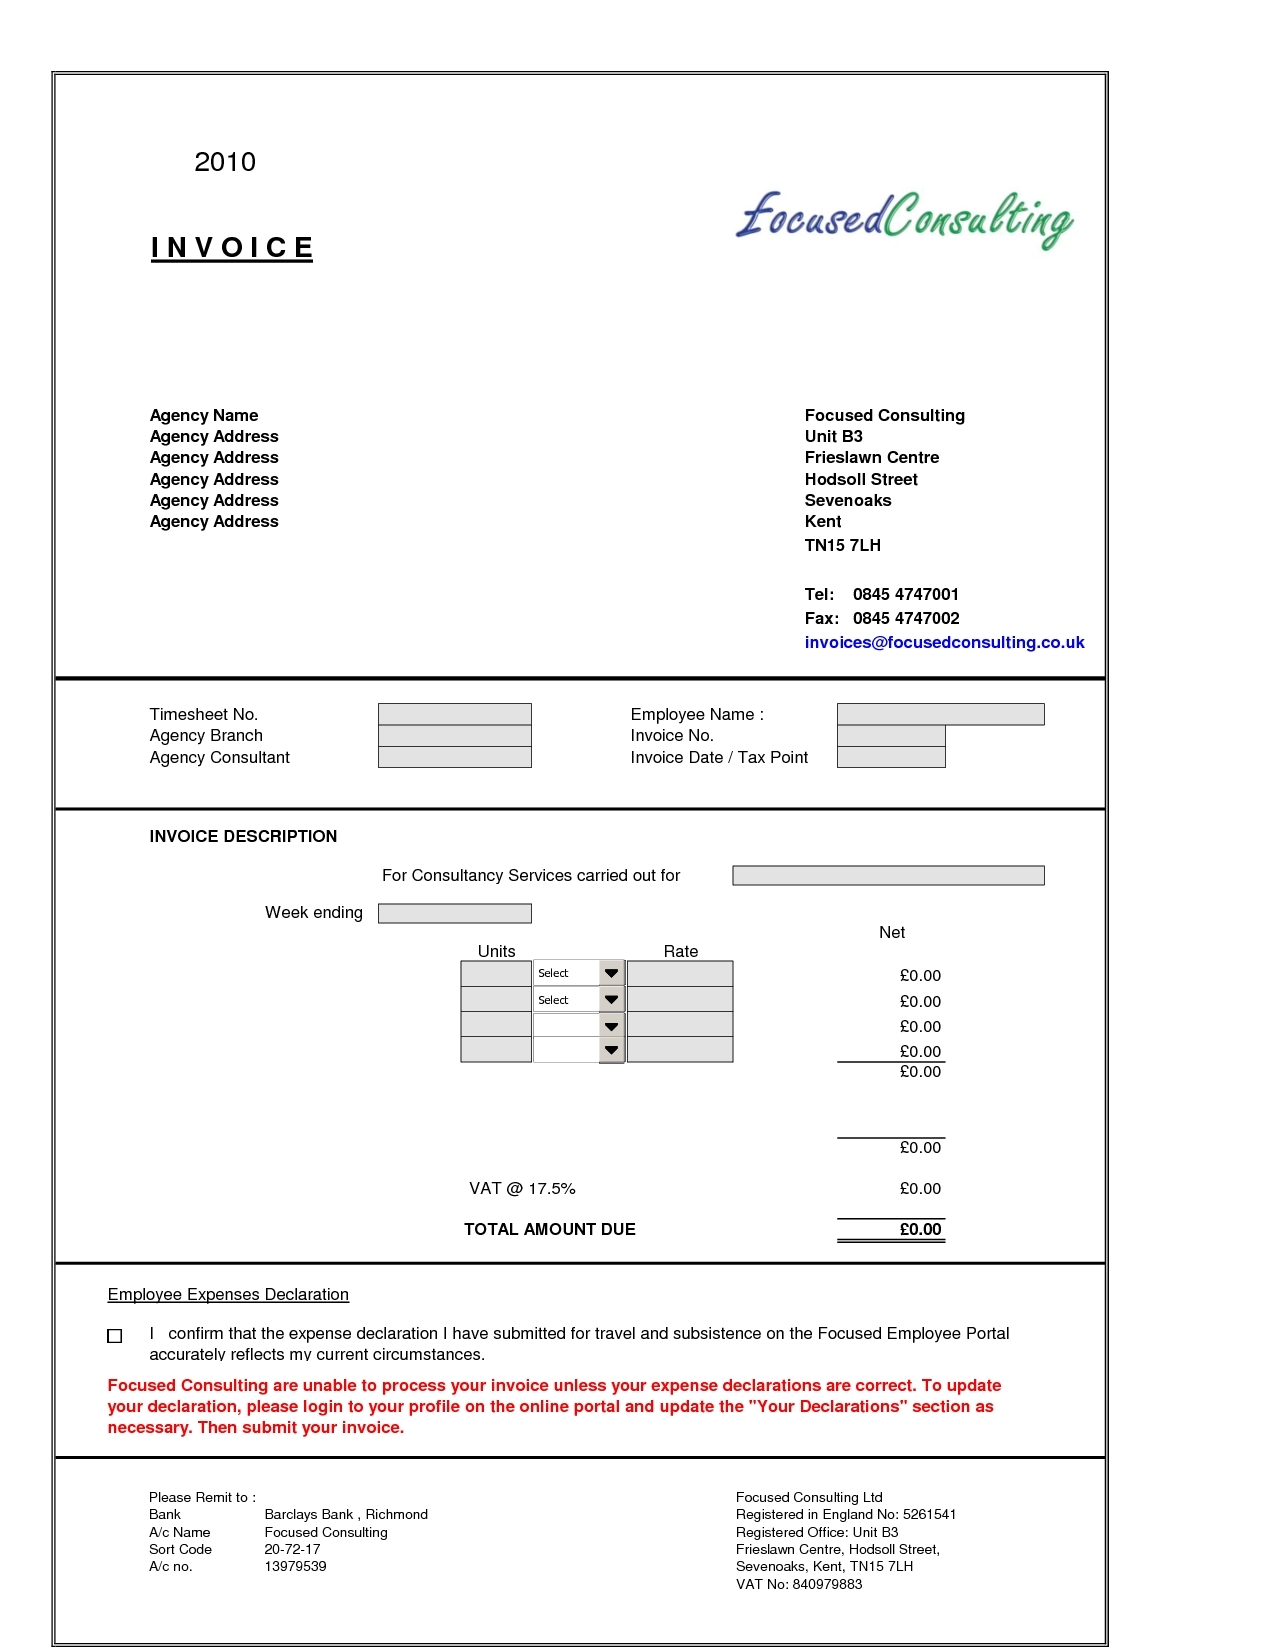 Invoice For Consulting Fees